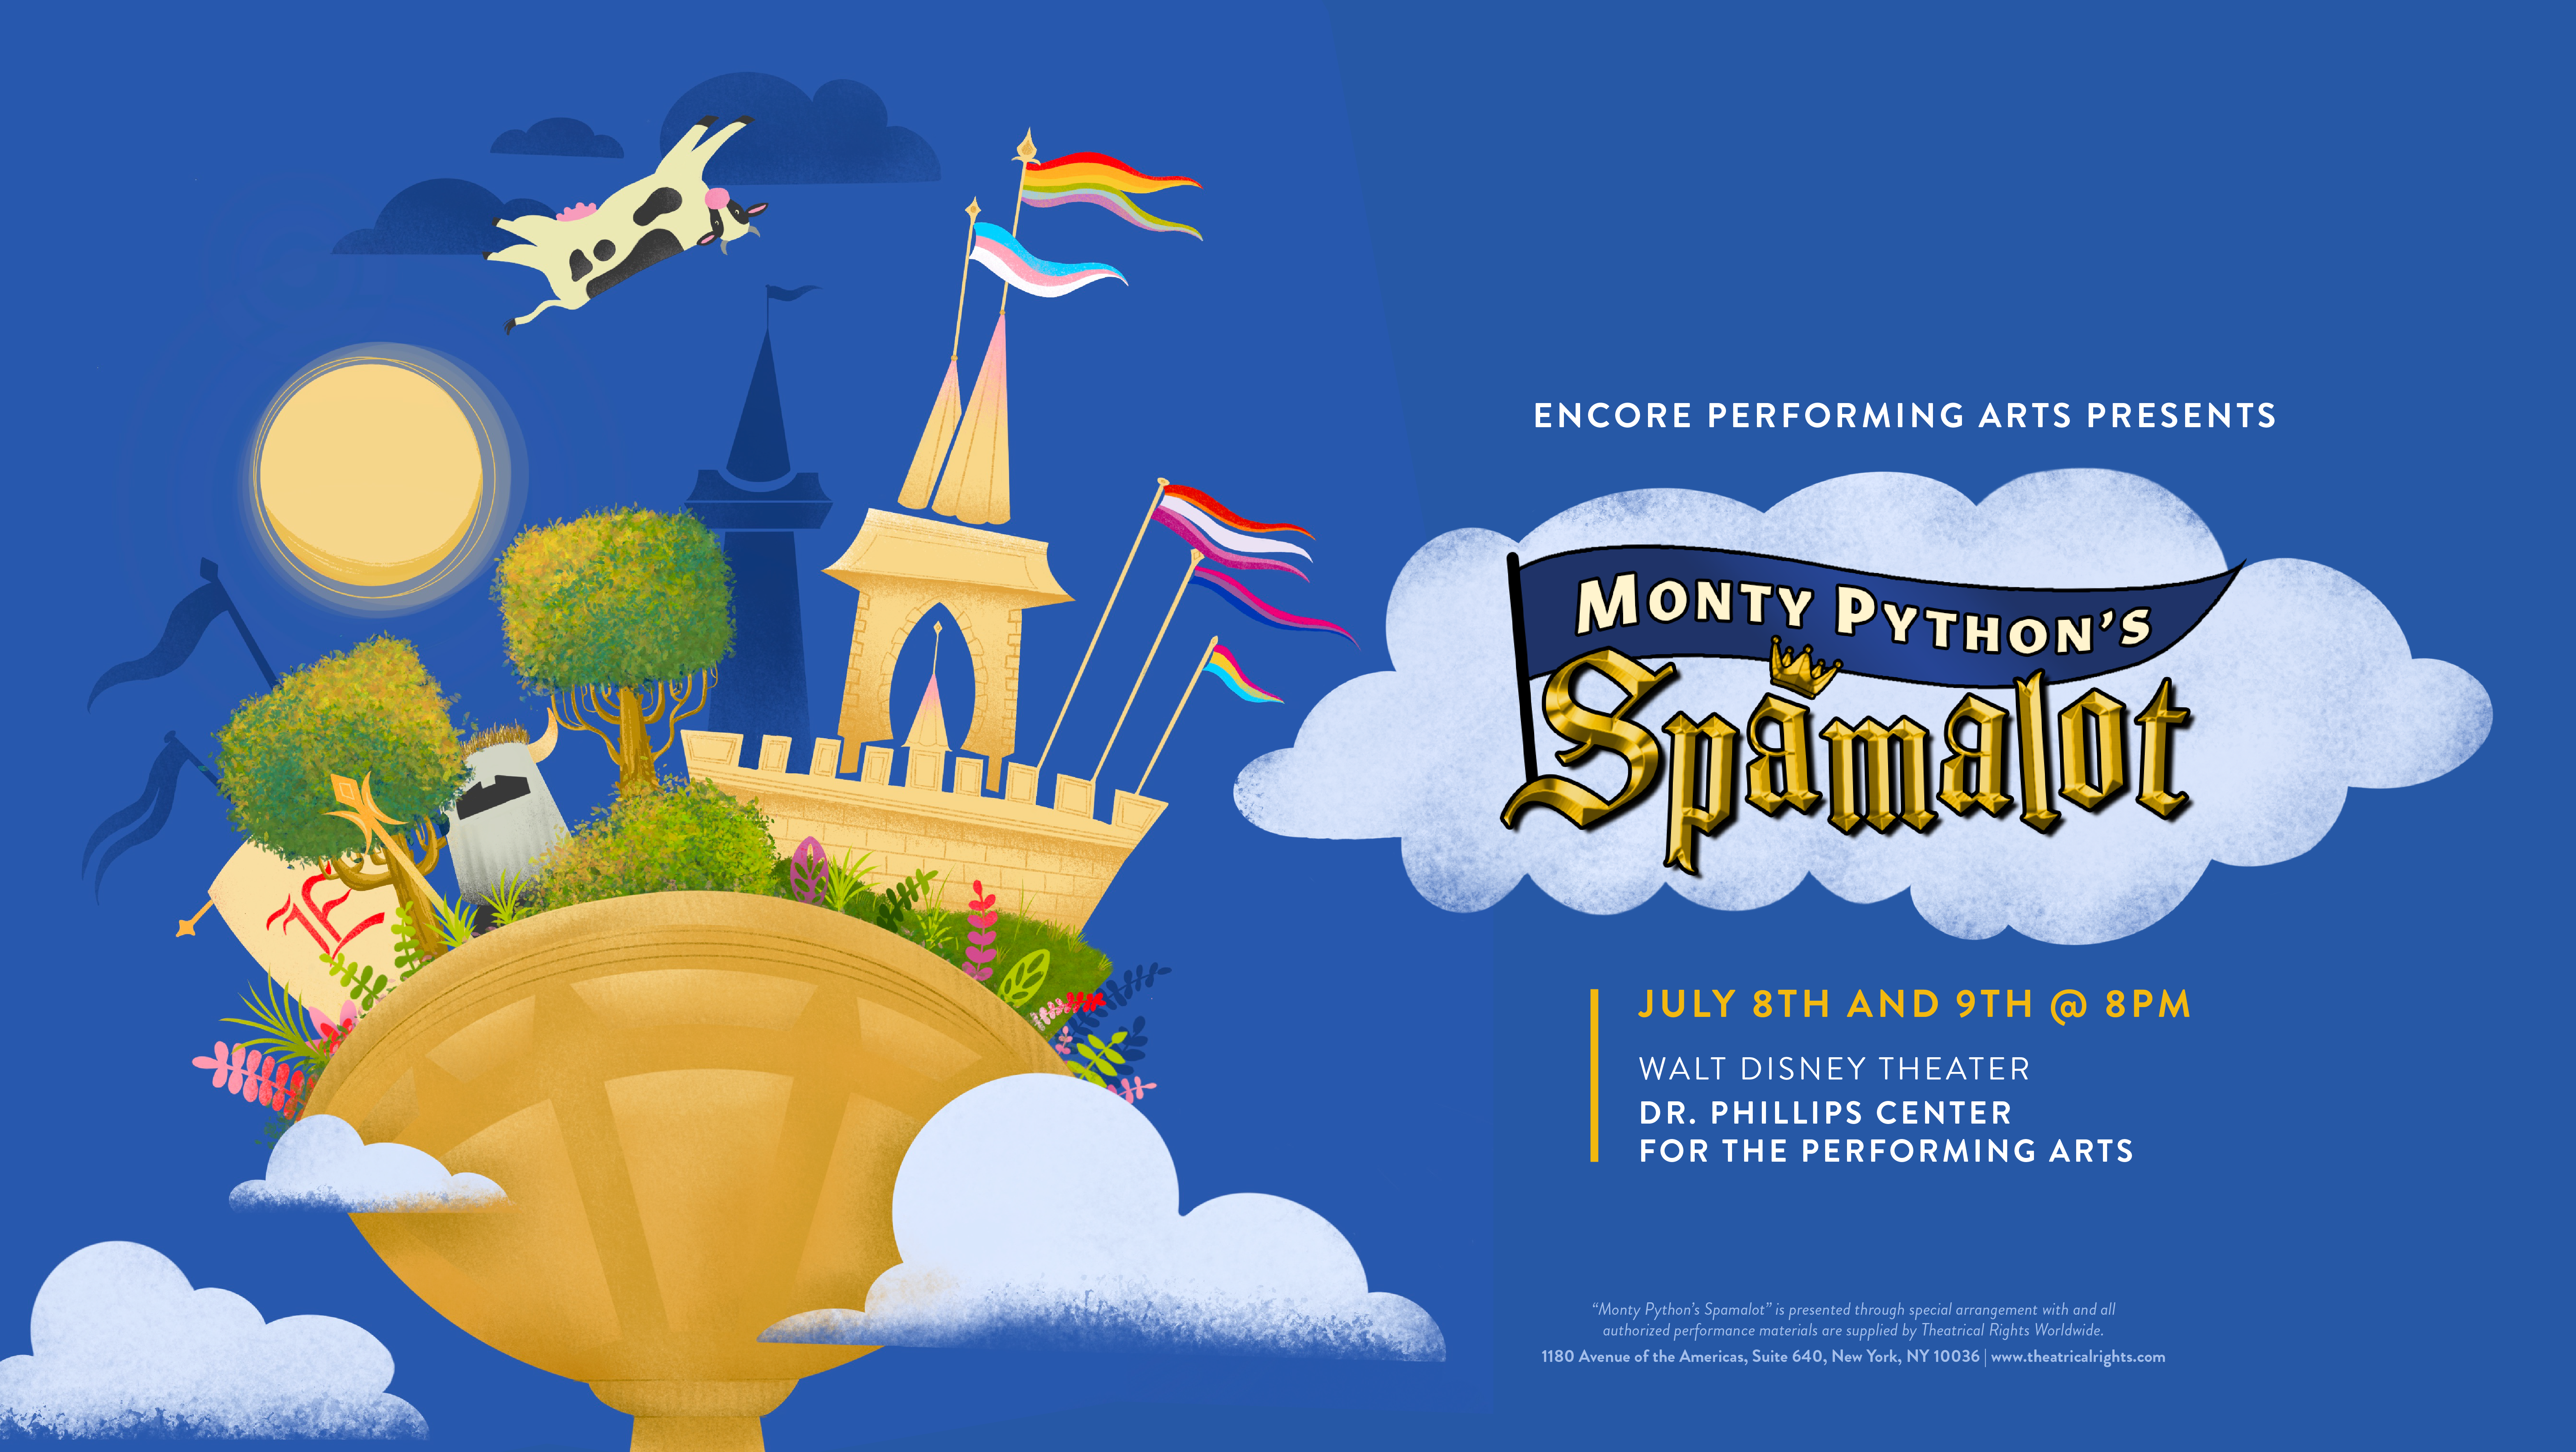 A visual graphic of a castle advertising Monty Python's Spamalot show put on by Encore in Orlando at the Dr. Phillips Center for the Performing Arts on July 8th and 9th at 8:00 p.m.